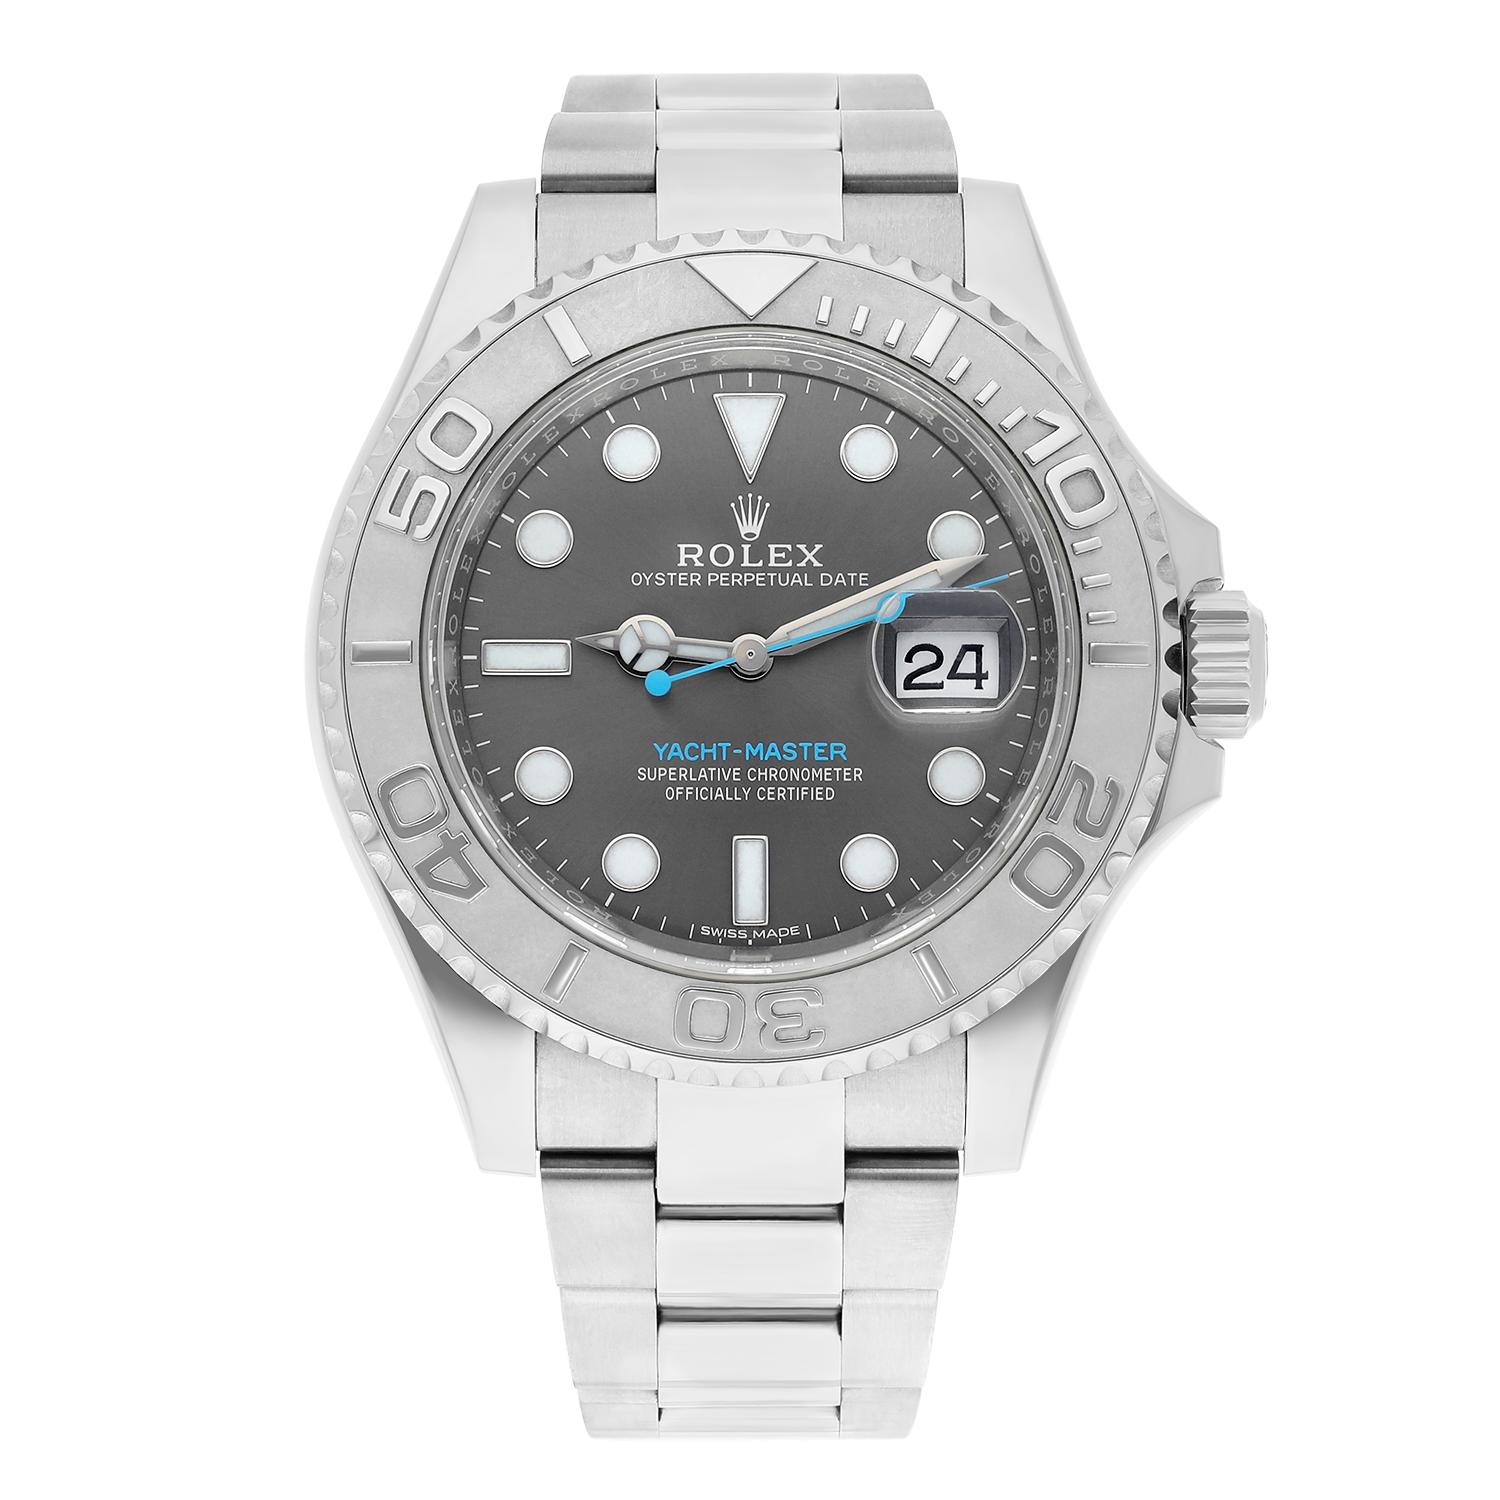 Rolex Yacht-Master 116622 Silver Oyster Bracelet with Gray Bezel Blue Hand

This watch has been professionally polished, serviced and does not have any visible scratches or blemishes. It is a genuine Rolex which has been inspected to verify